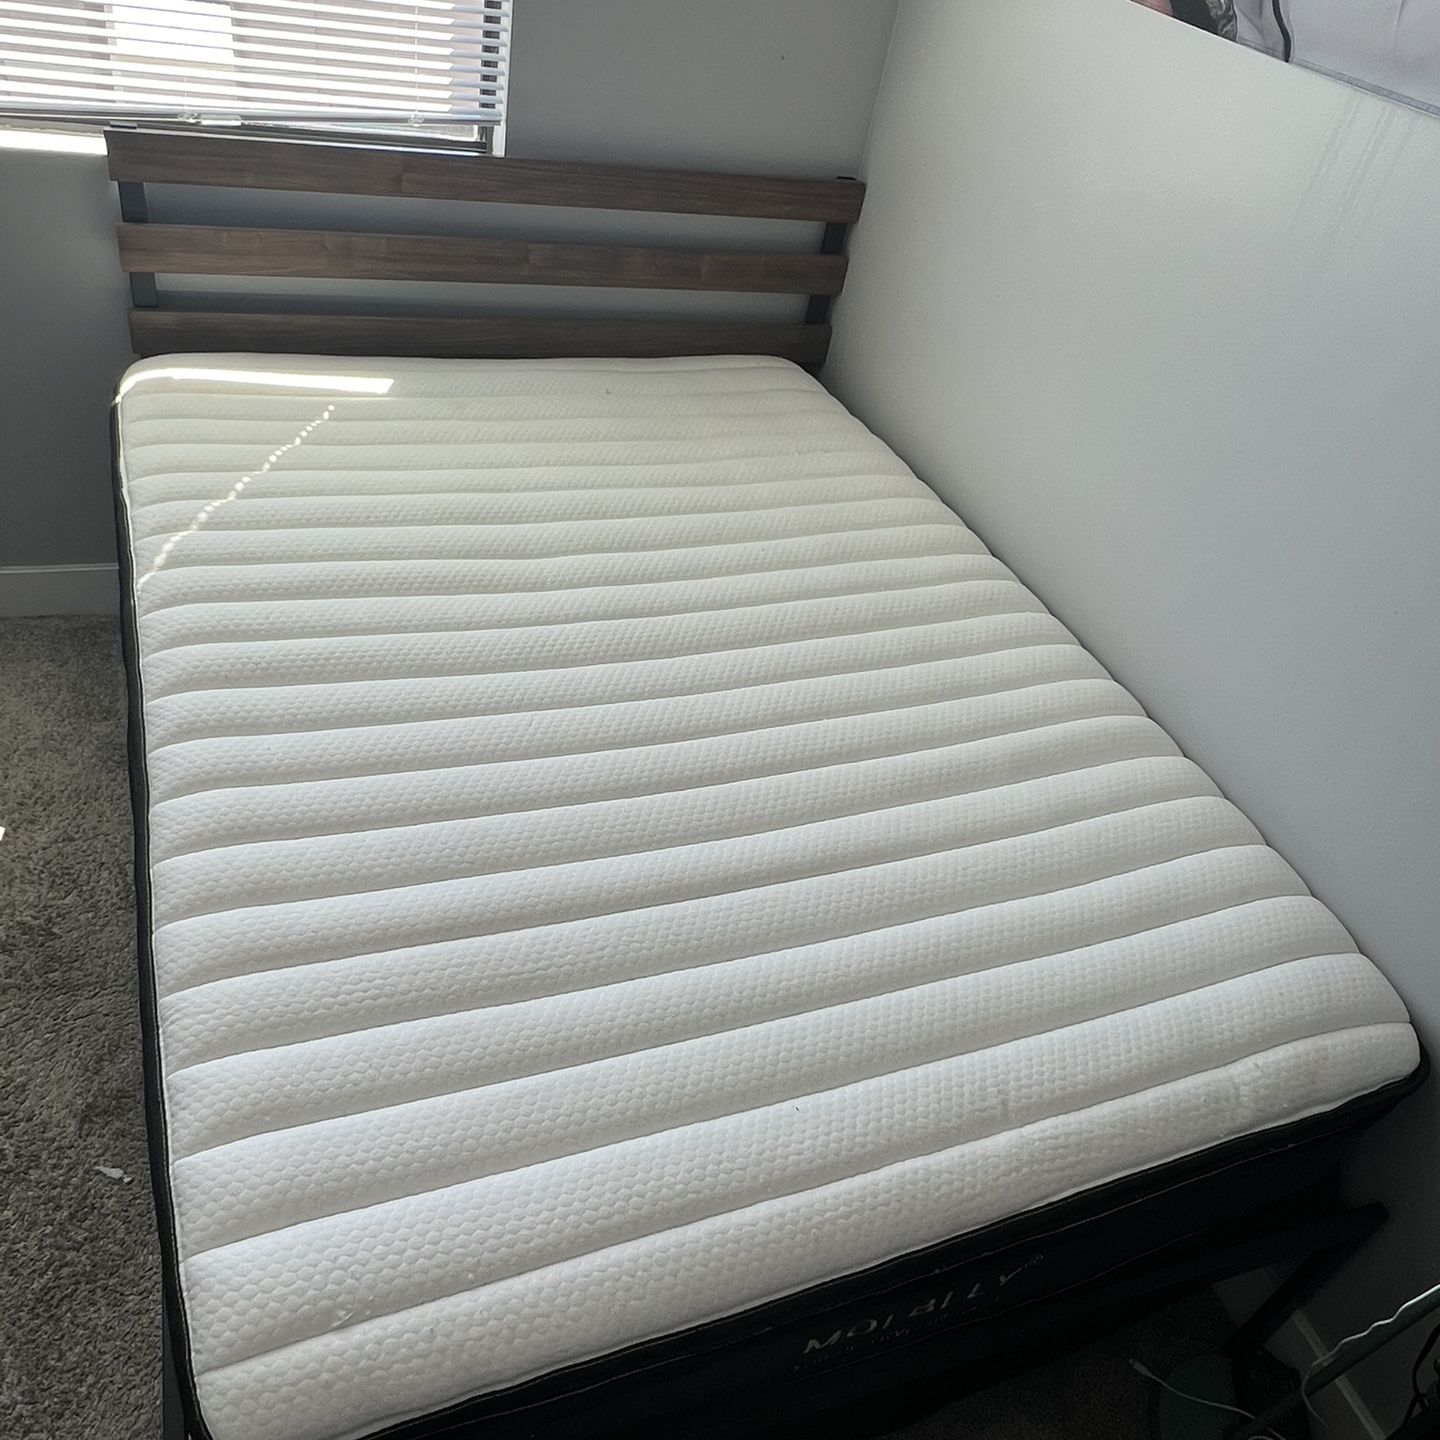 Full Sized Mattress And Bed Frame 